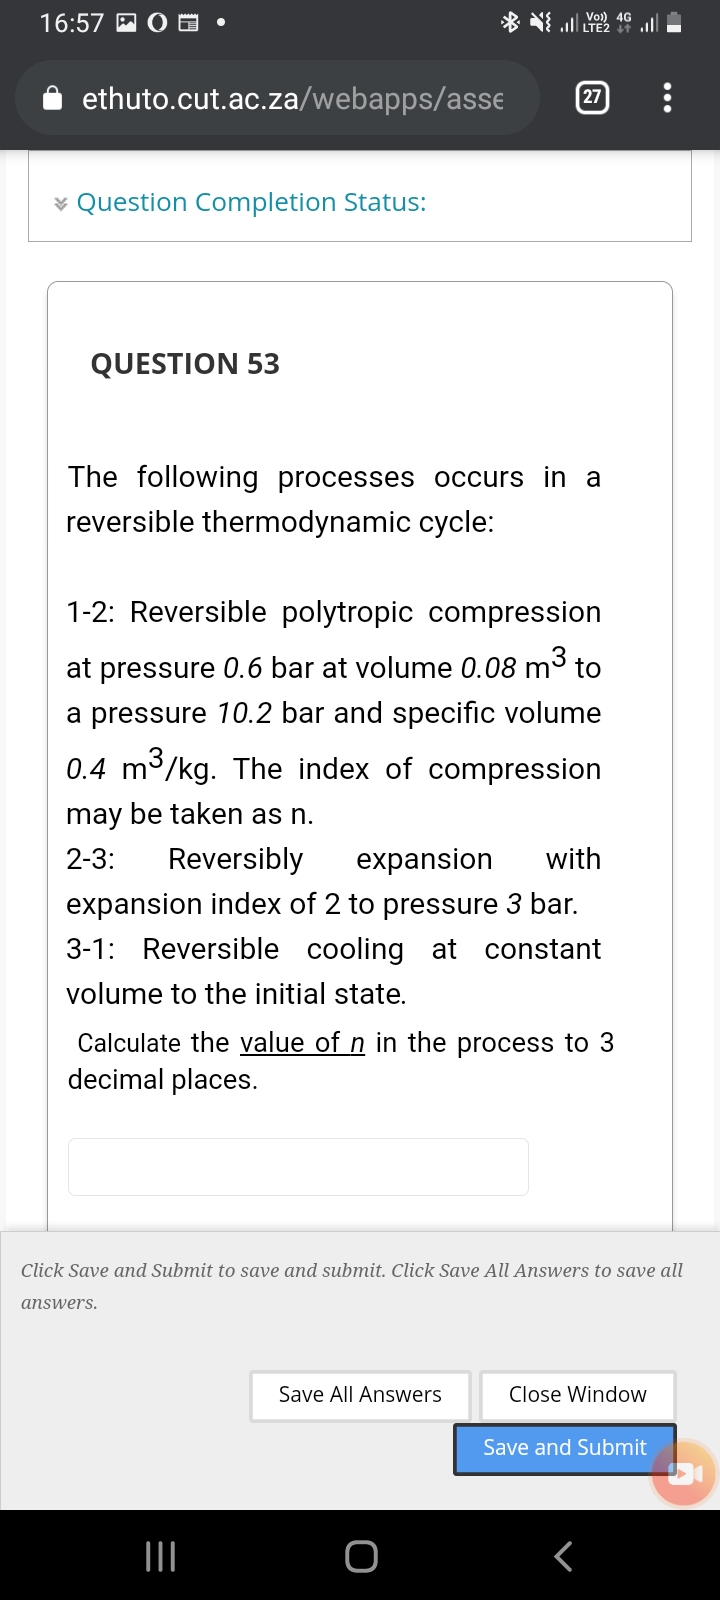 16:57 A O
* l LTE2 i
ethuto.cut.ac.za/webapps/asse
27
¥ Question Completion Status:
QUESTION 53
The following processes occurs in a
reversible thermodynamic cycle:
1-2: Reversible polytropic compression
at pressure 0.6 bar at volume 0.08 m3 to
a pressure 10.2 bar and specific volume
0.4 m3/kg. The index of compression
may be taken as n.
2-3:
Reversibly
expansion
with
expansion index of 2 to pressure 3 bar.
3-1: Reversible cooling at constant
volume to the initial state.
Calculate the value of n in the process to 3
decimal places.
Click Save and Submit to save and submit. Click Save All Answers to save all
answers.
Save All Answers
Close Window
Save and Submit
